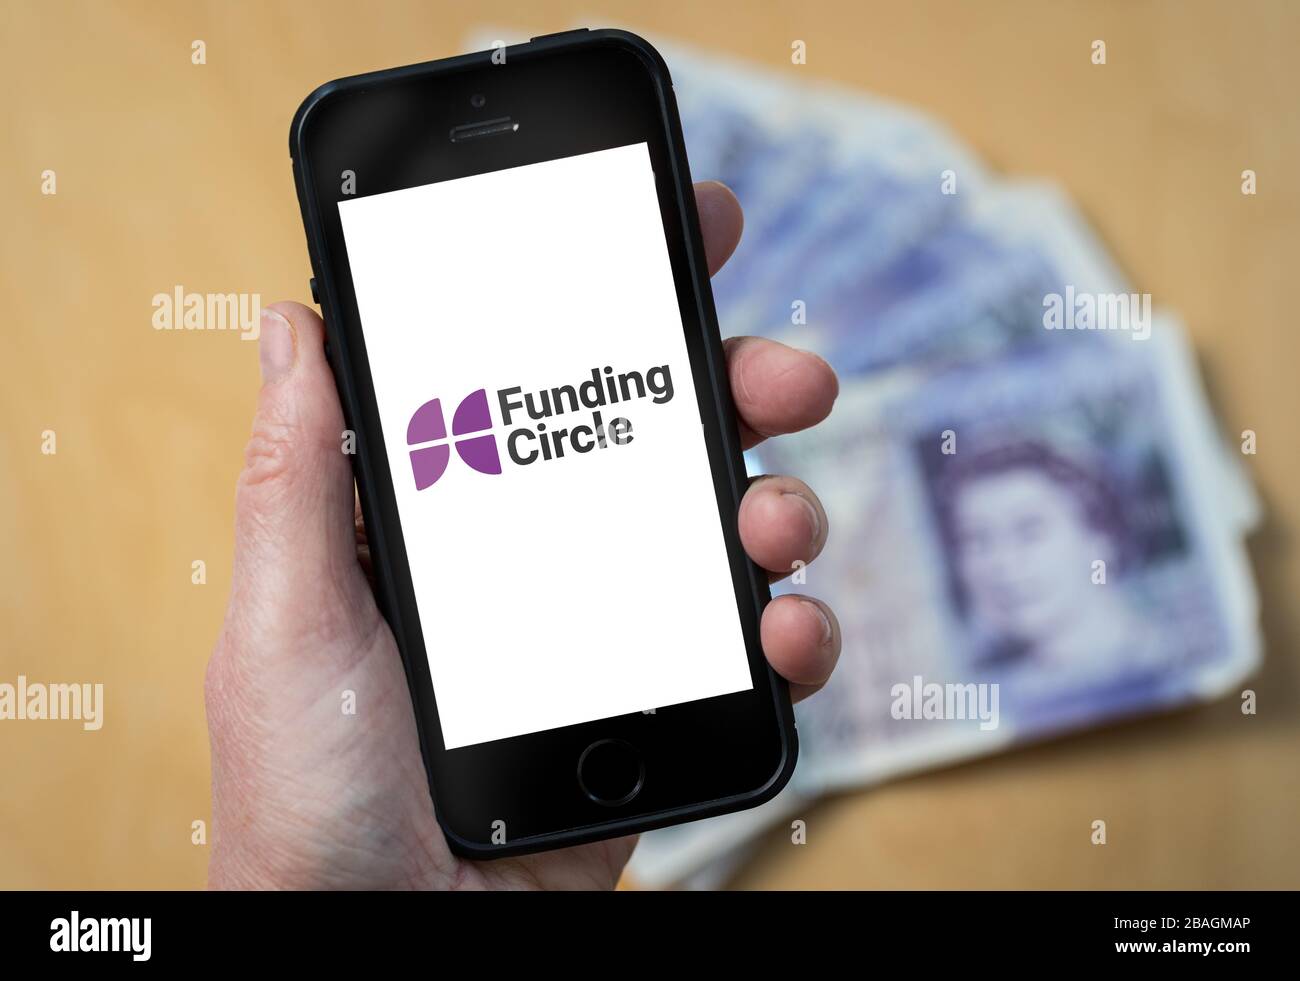 A woman looking at the Funding Circle logo on a mobile phone. Funding Circle is a peer-to-peer lending marketplace. (editorial Use Only) Stock Photo